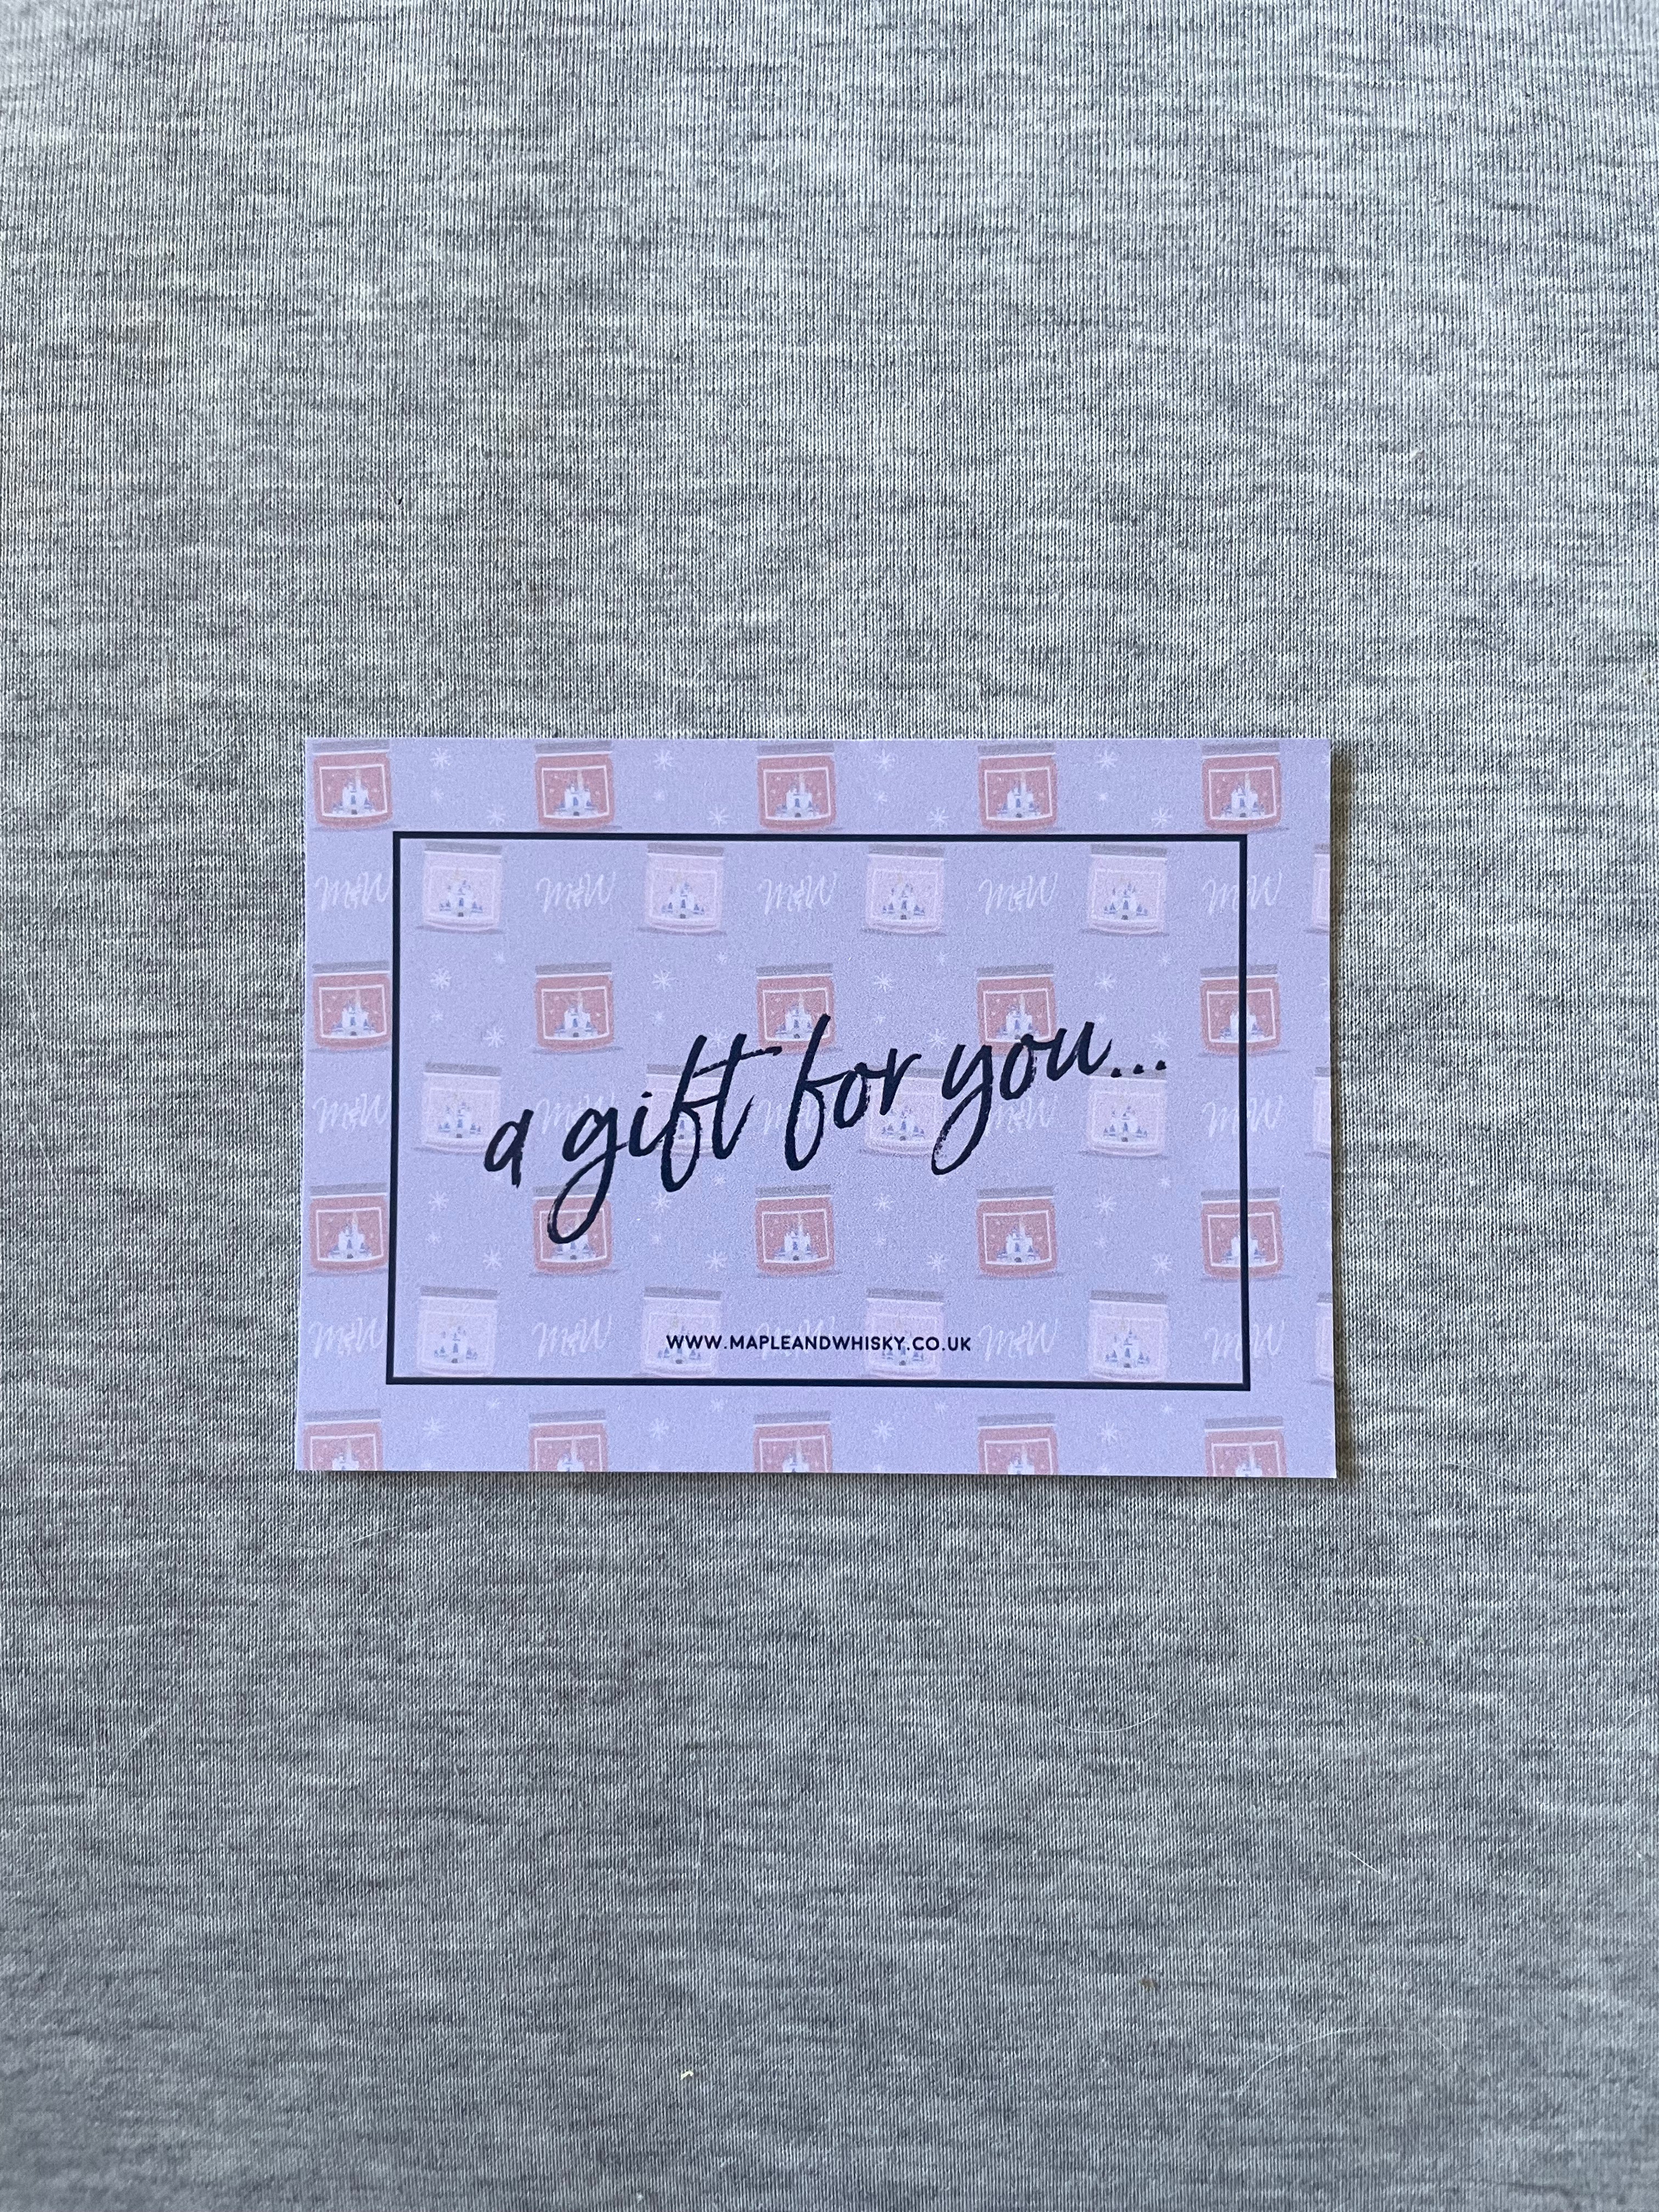 Gift Note